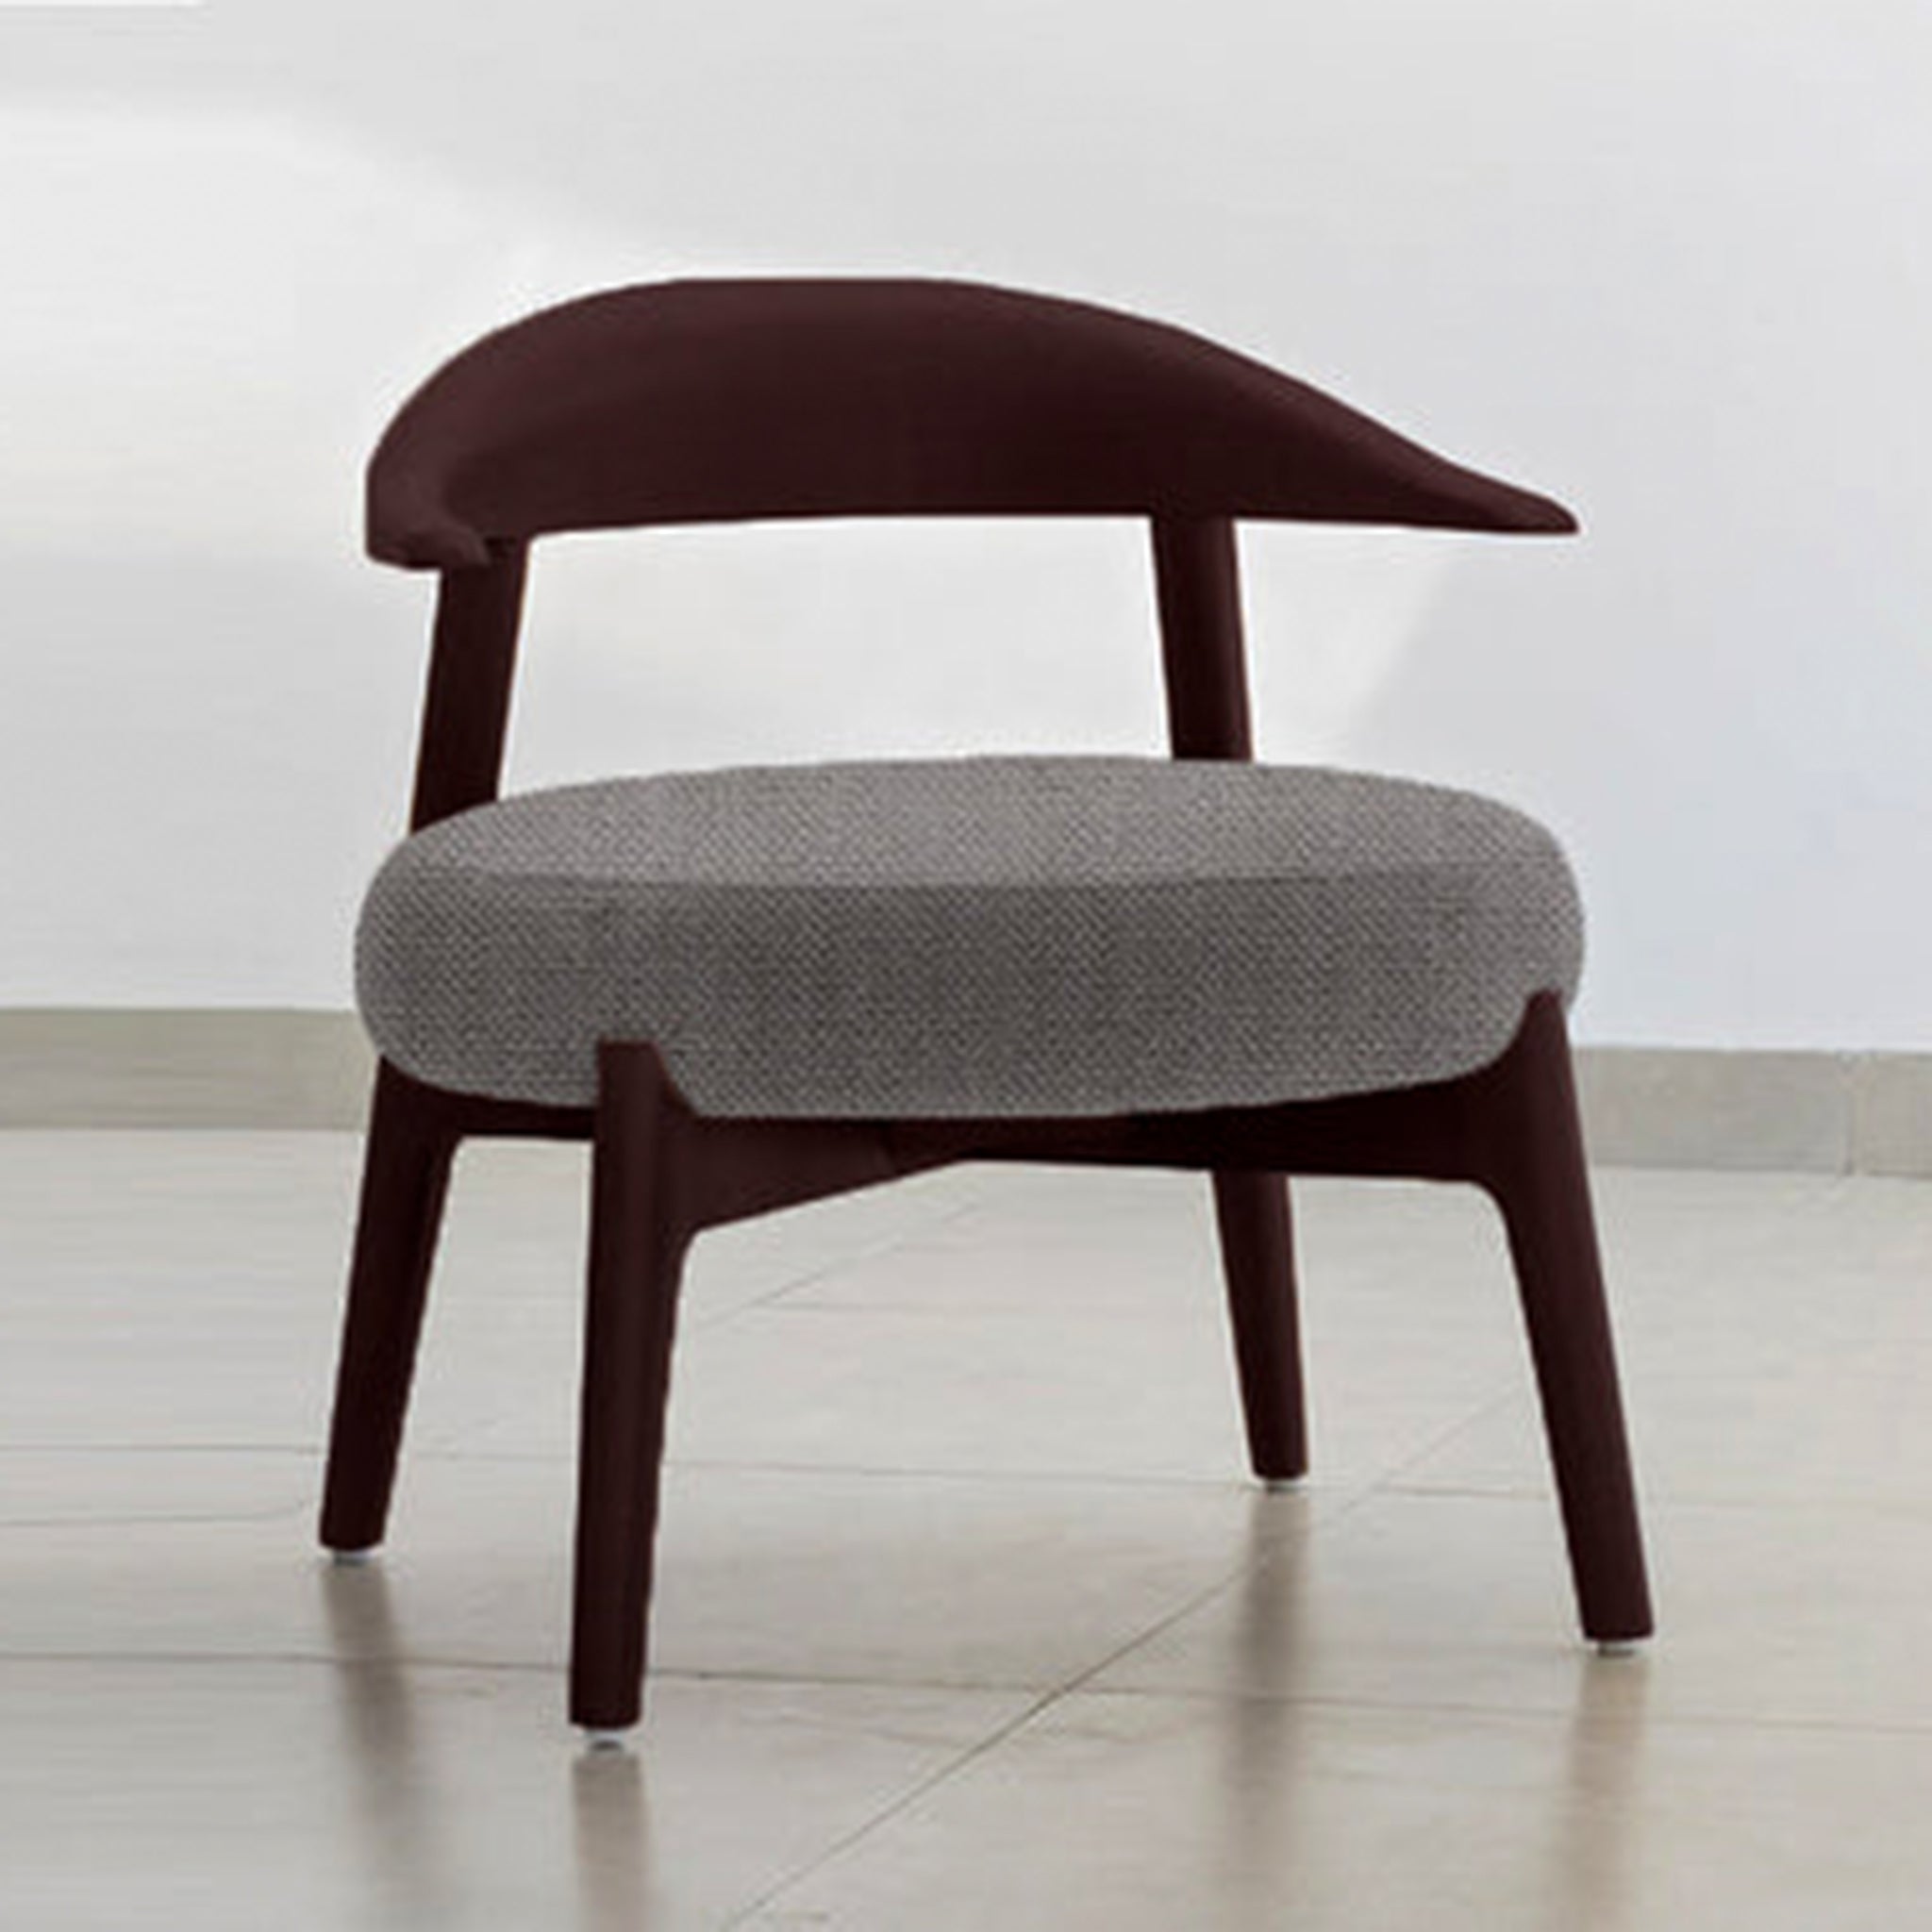 "The Hyde Accent Chair with a sleek wooden frame and cozy fabric seat"